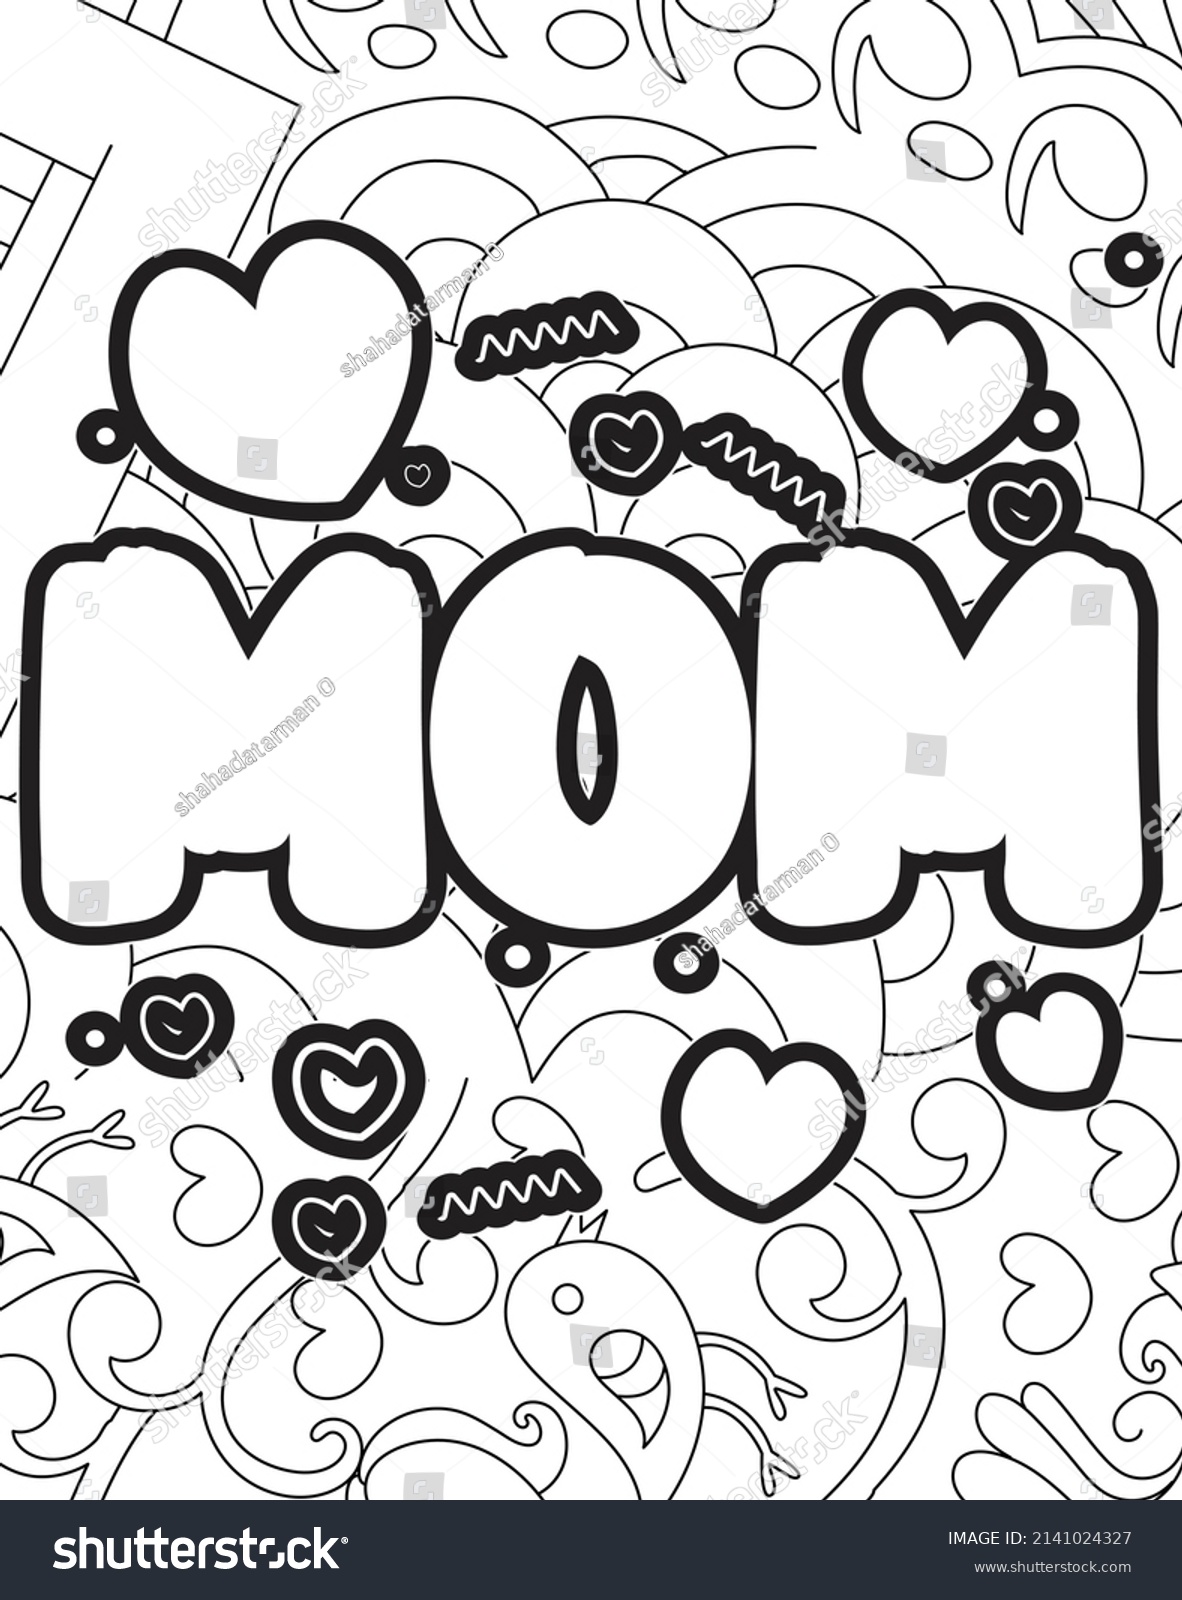 Mom Mothers Day Coloring Page Mother Stock Vector Royalty Free Shutterstock